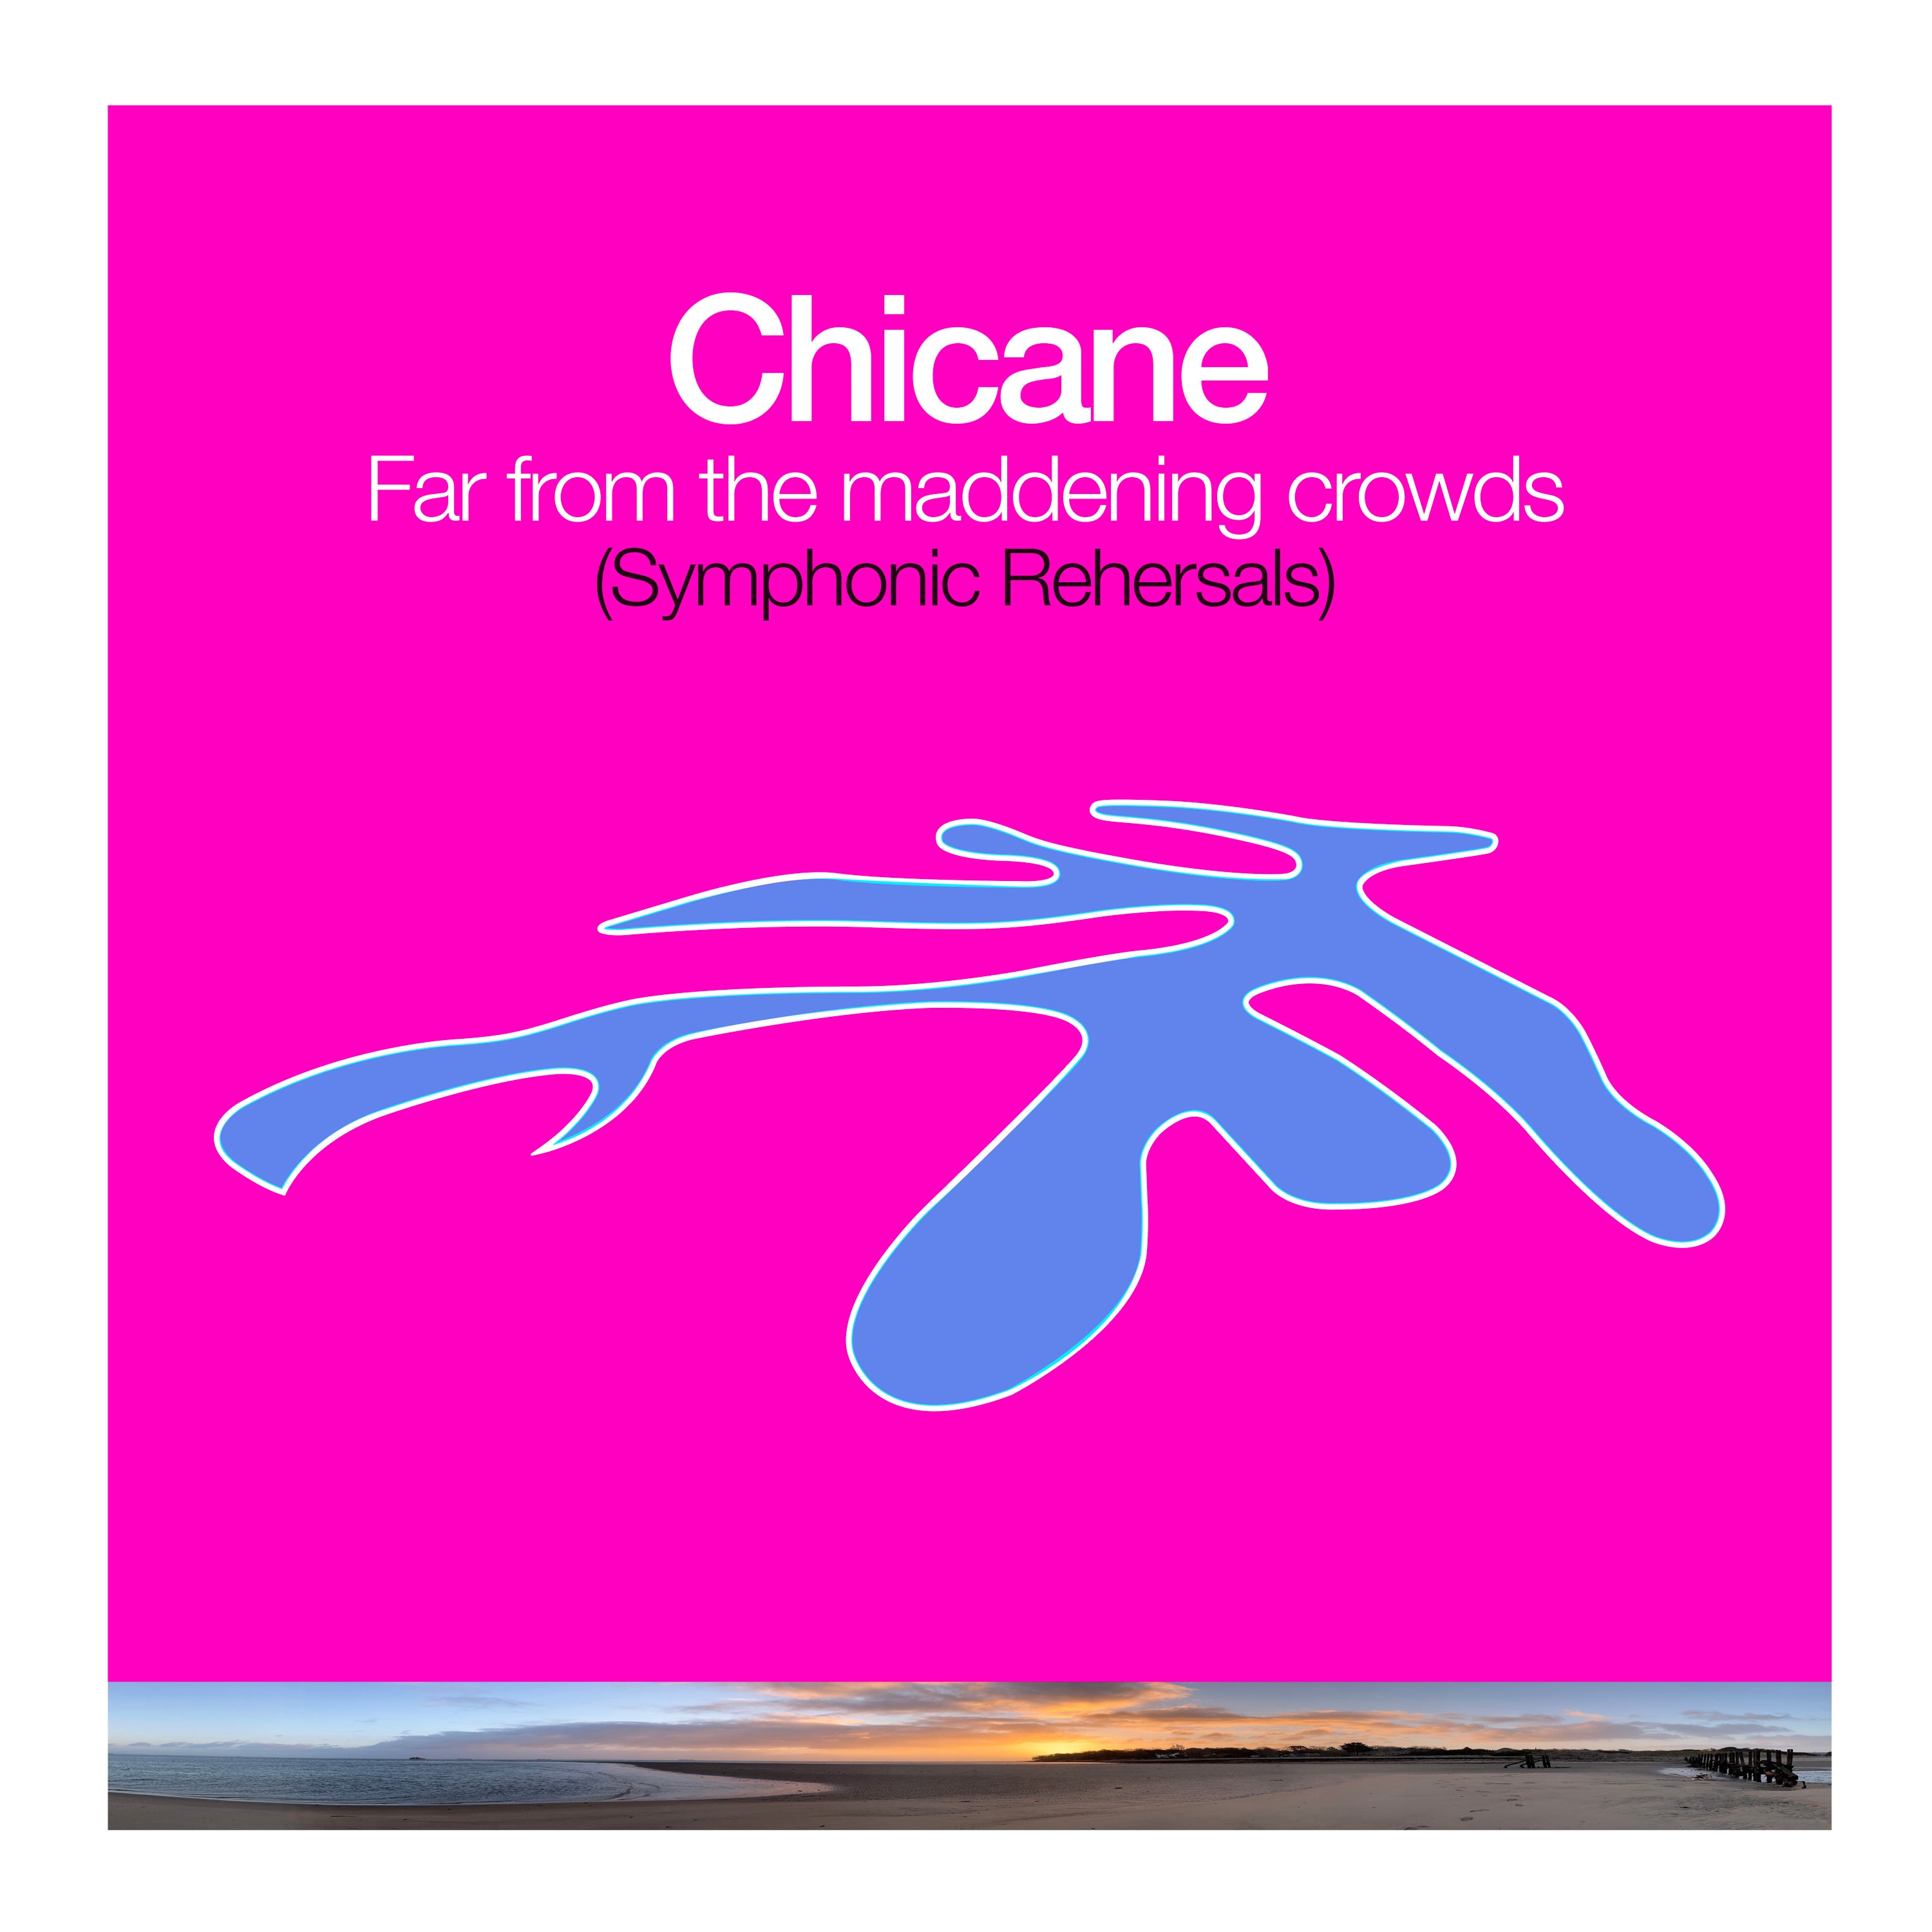 Chicane - Far From The Maddening Crowds (Symphonic Rehearsals): Vinyl LP